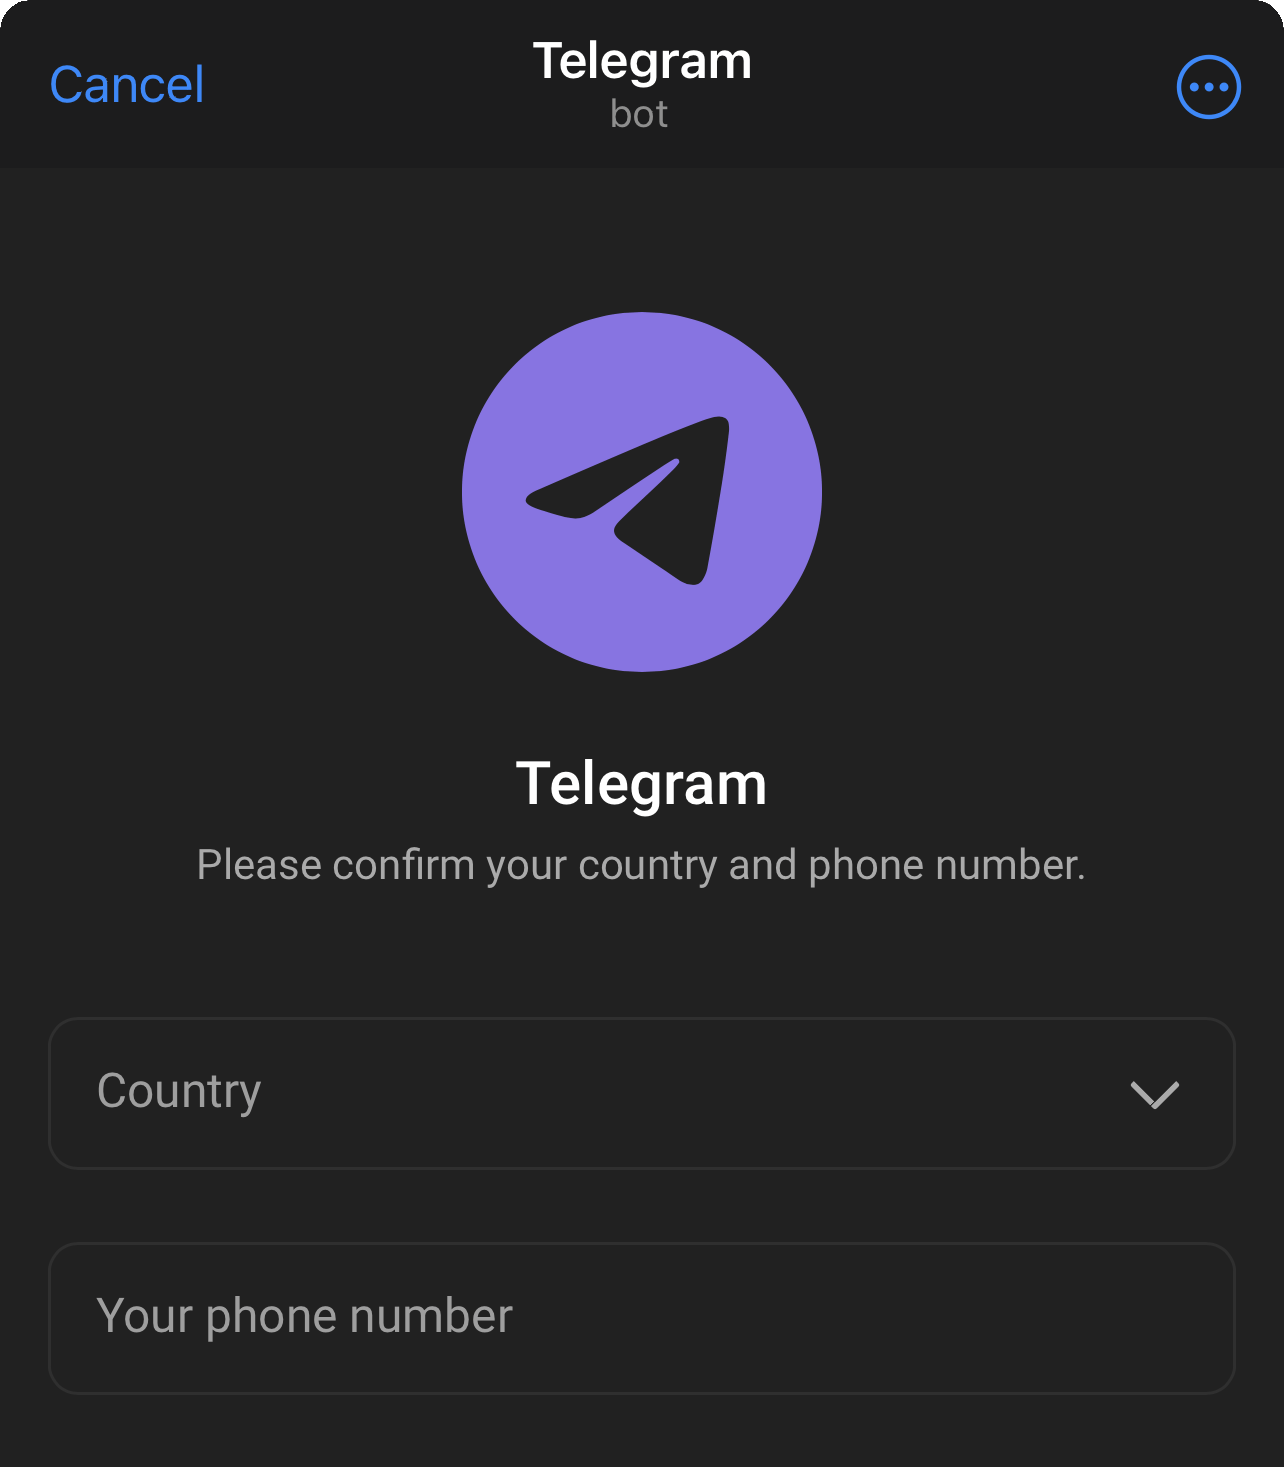 A login screen, which reads Telegram in Telegram's web app label. Inside the web app, again Telegram shows up and asks for country and phone number to begin the login process.